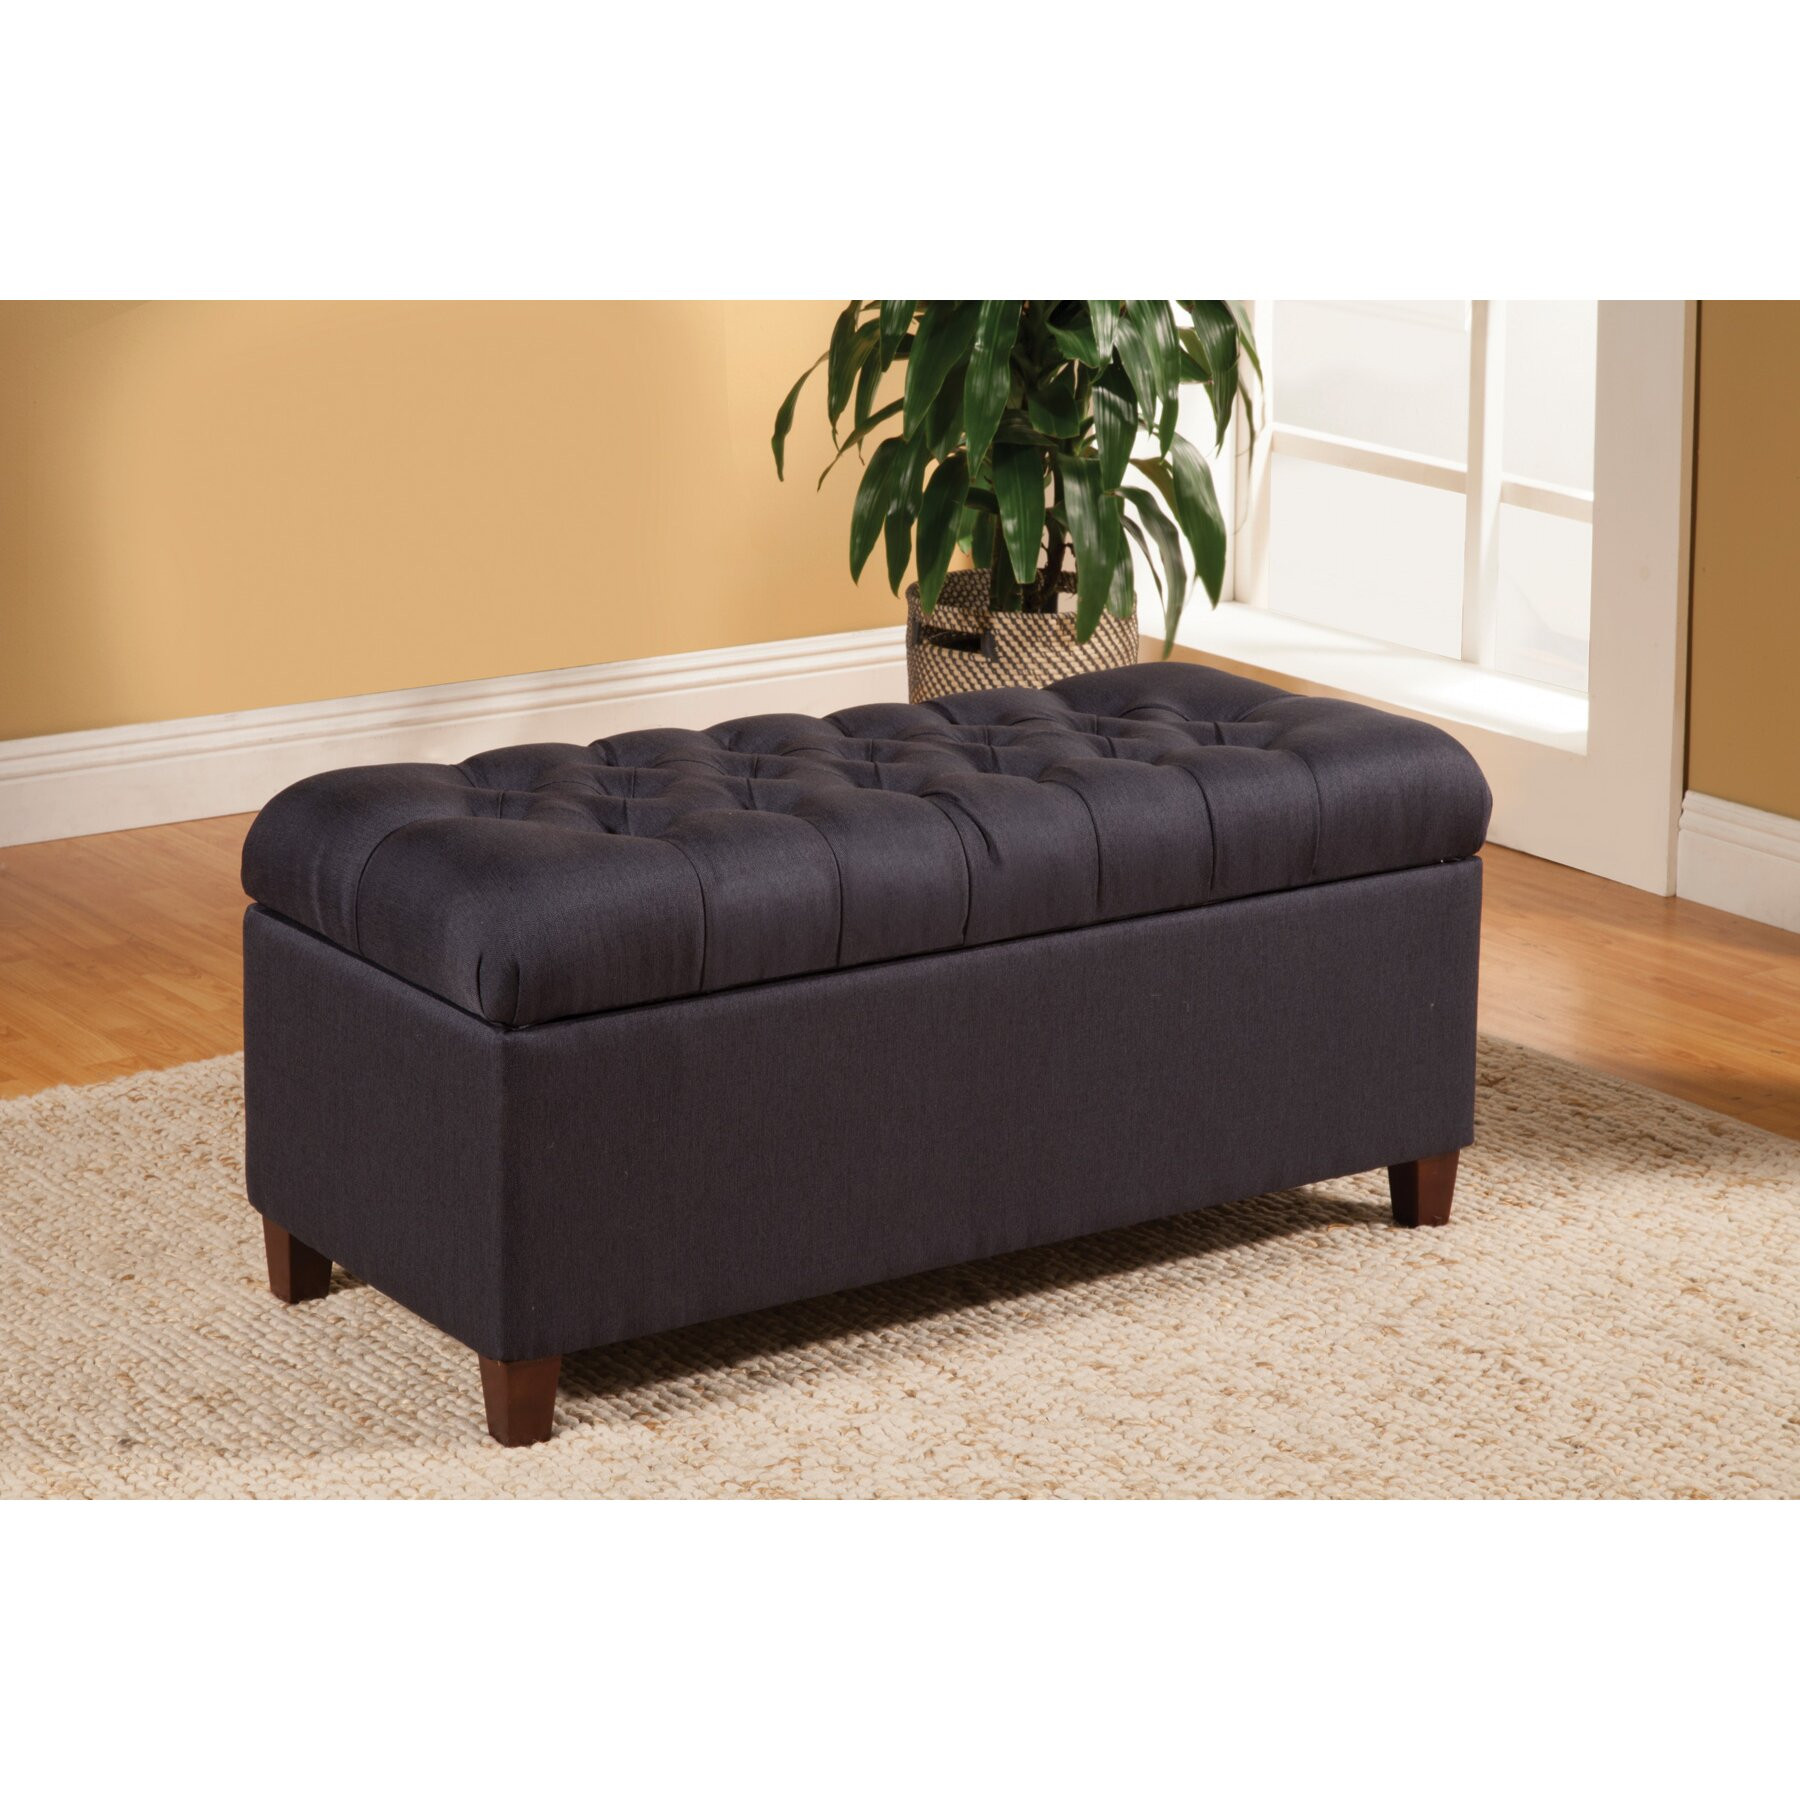 Bench For Bedroom With Storage
 Alcott Hill Henderson Upholstered Storage Bedroom Bench